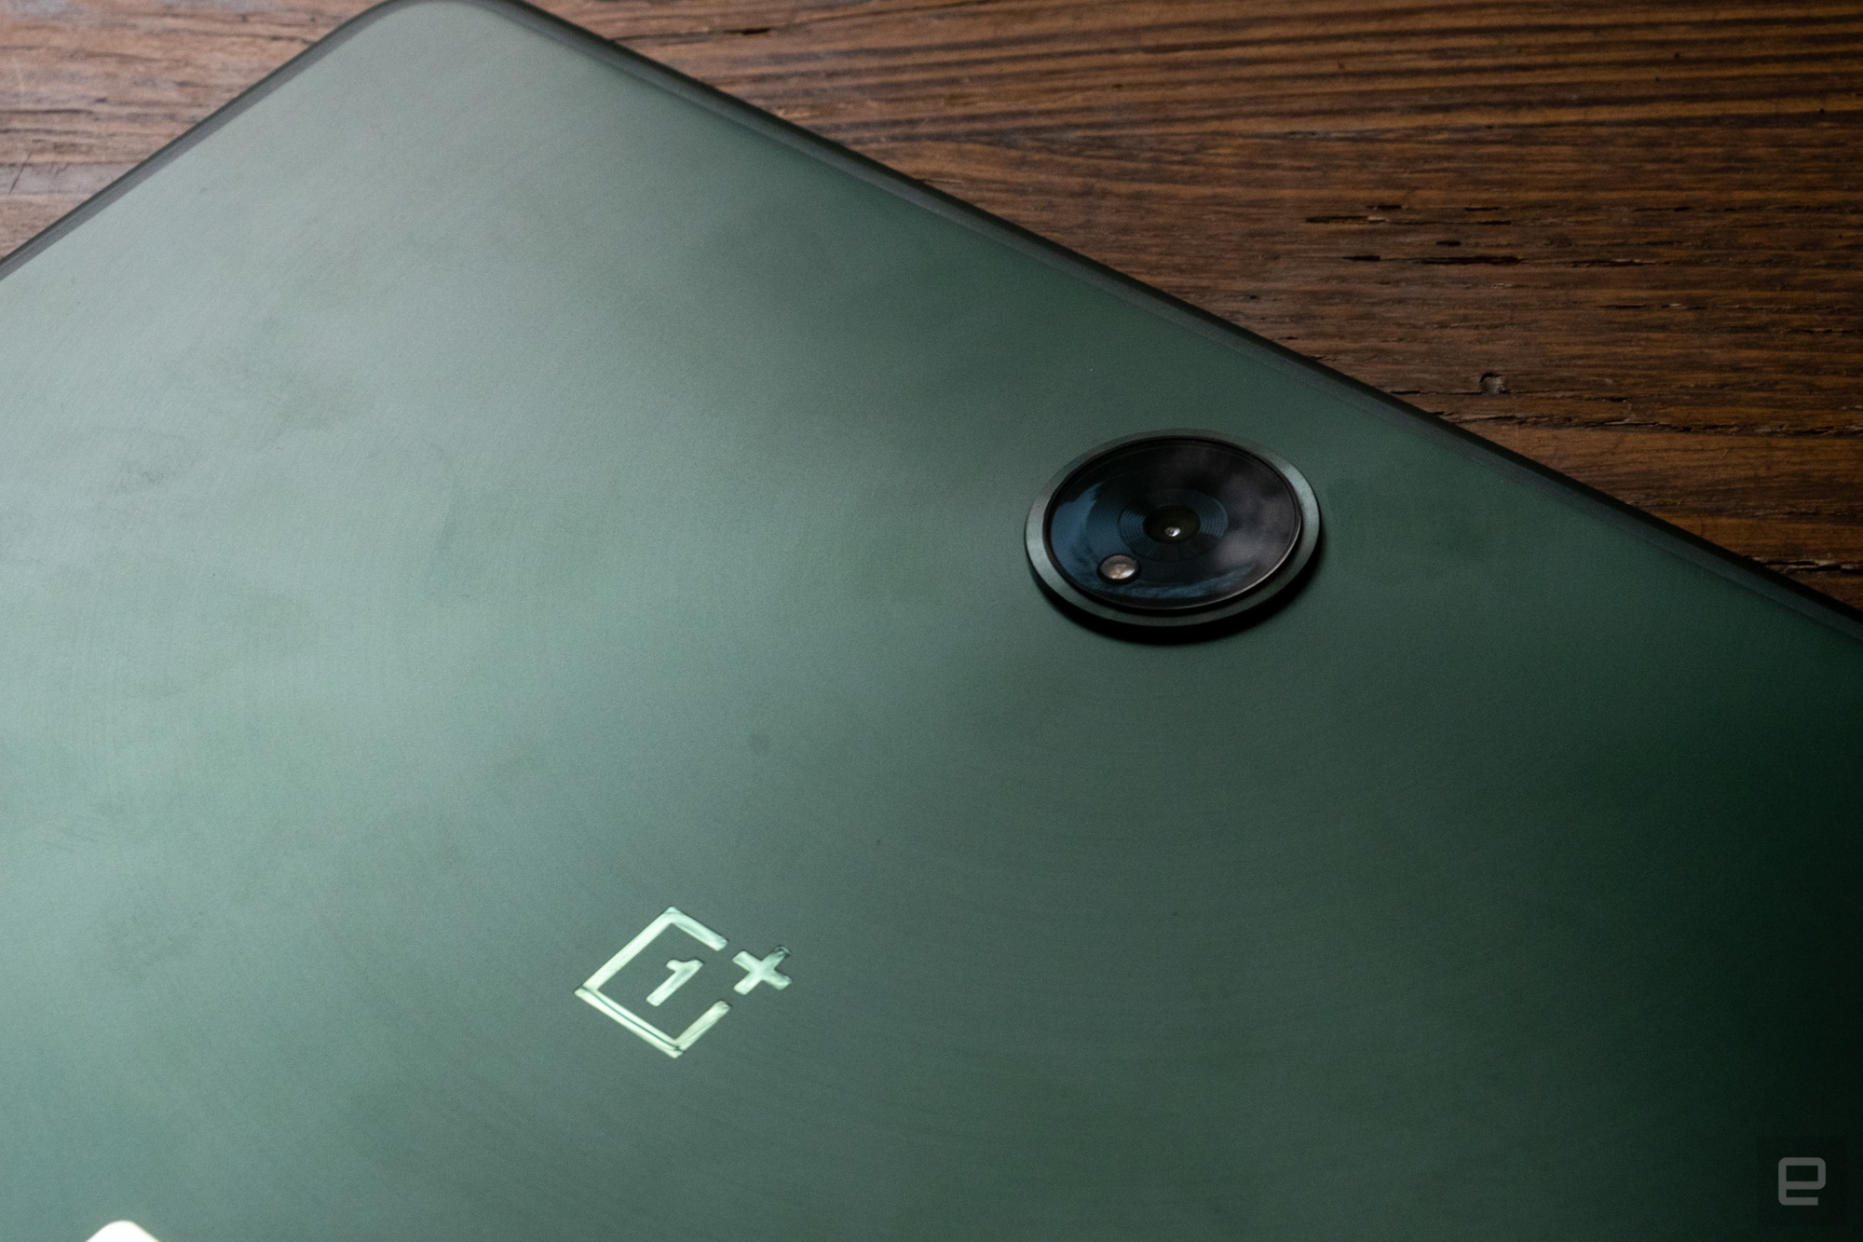 The OnePlus Pad: a good Android tablet with room for improvement